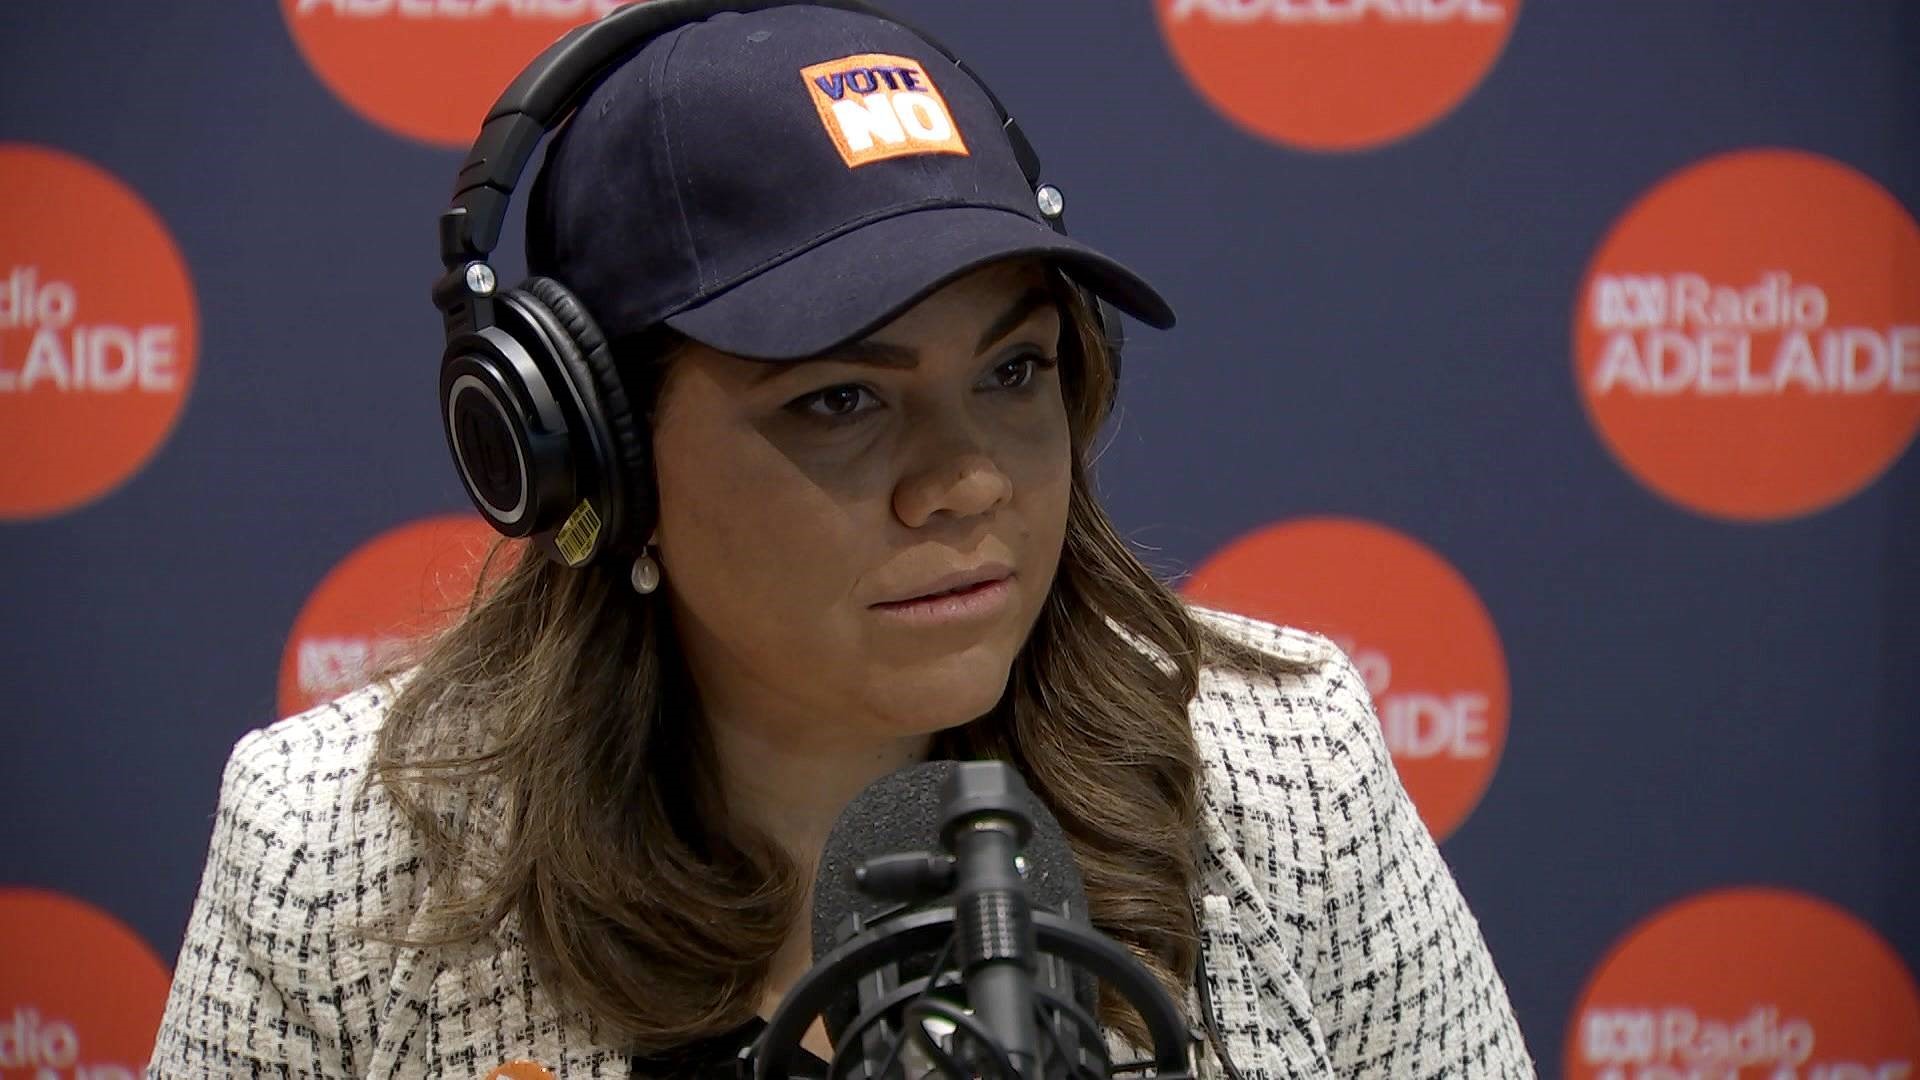 A woman wears a cap and headphones while speaking into a microphone.